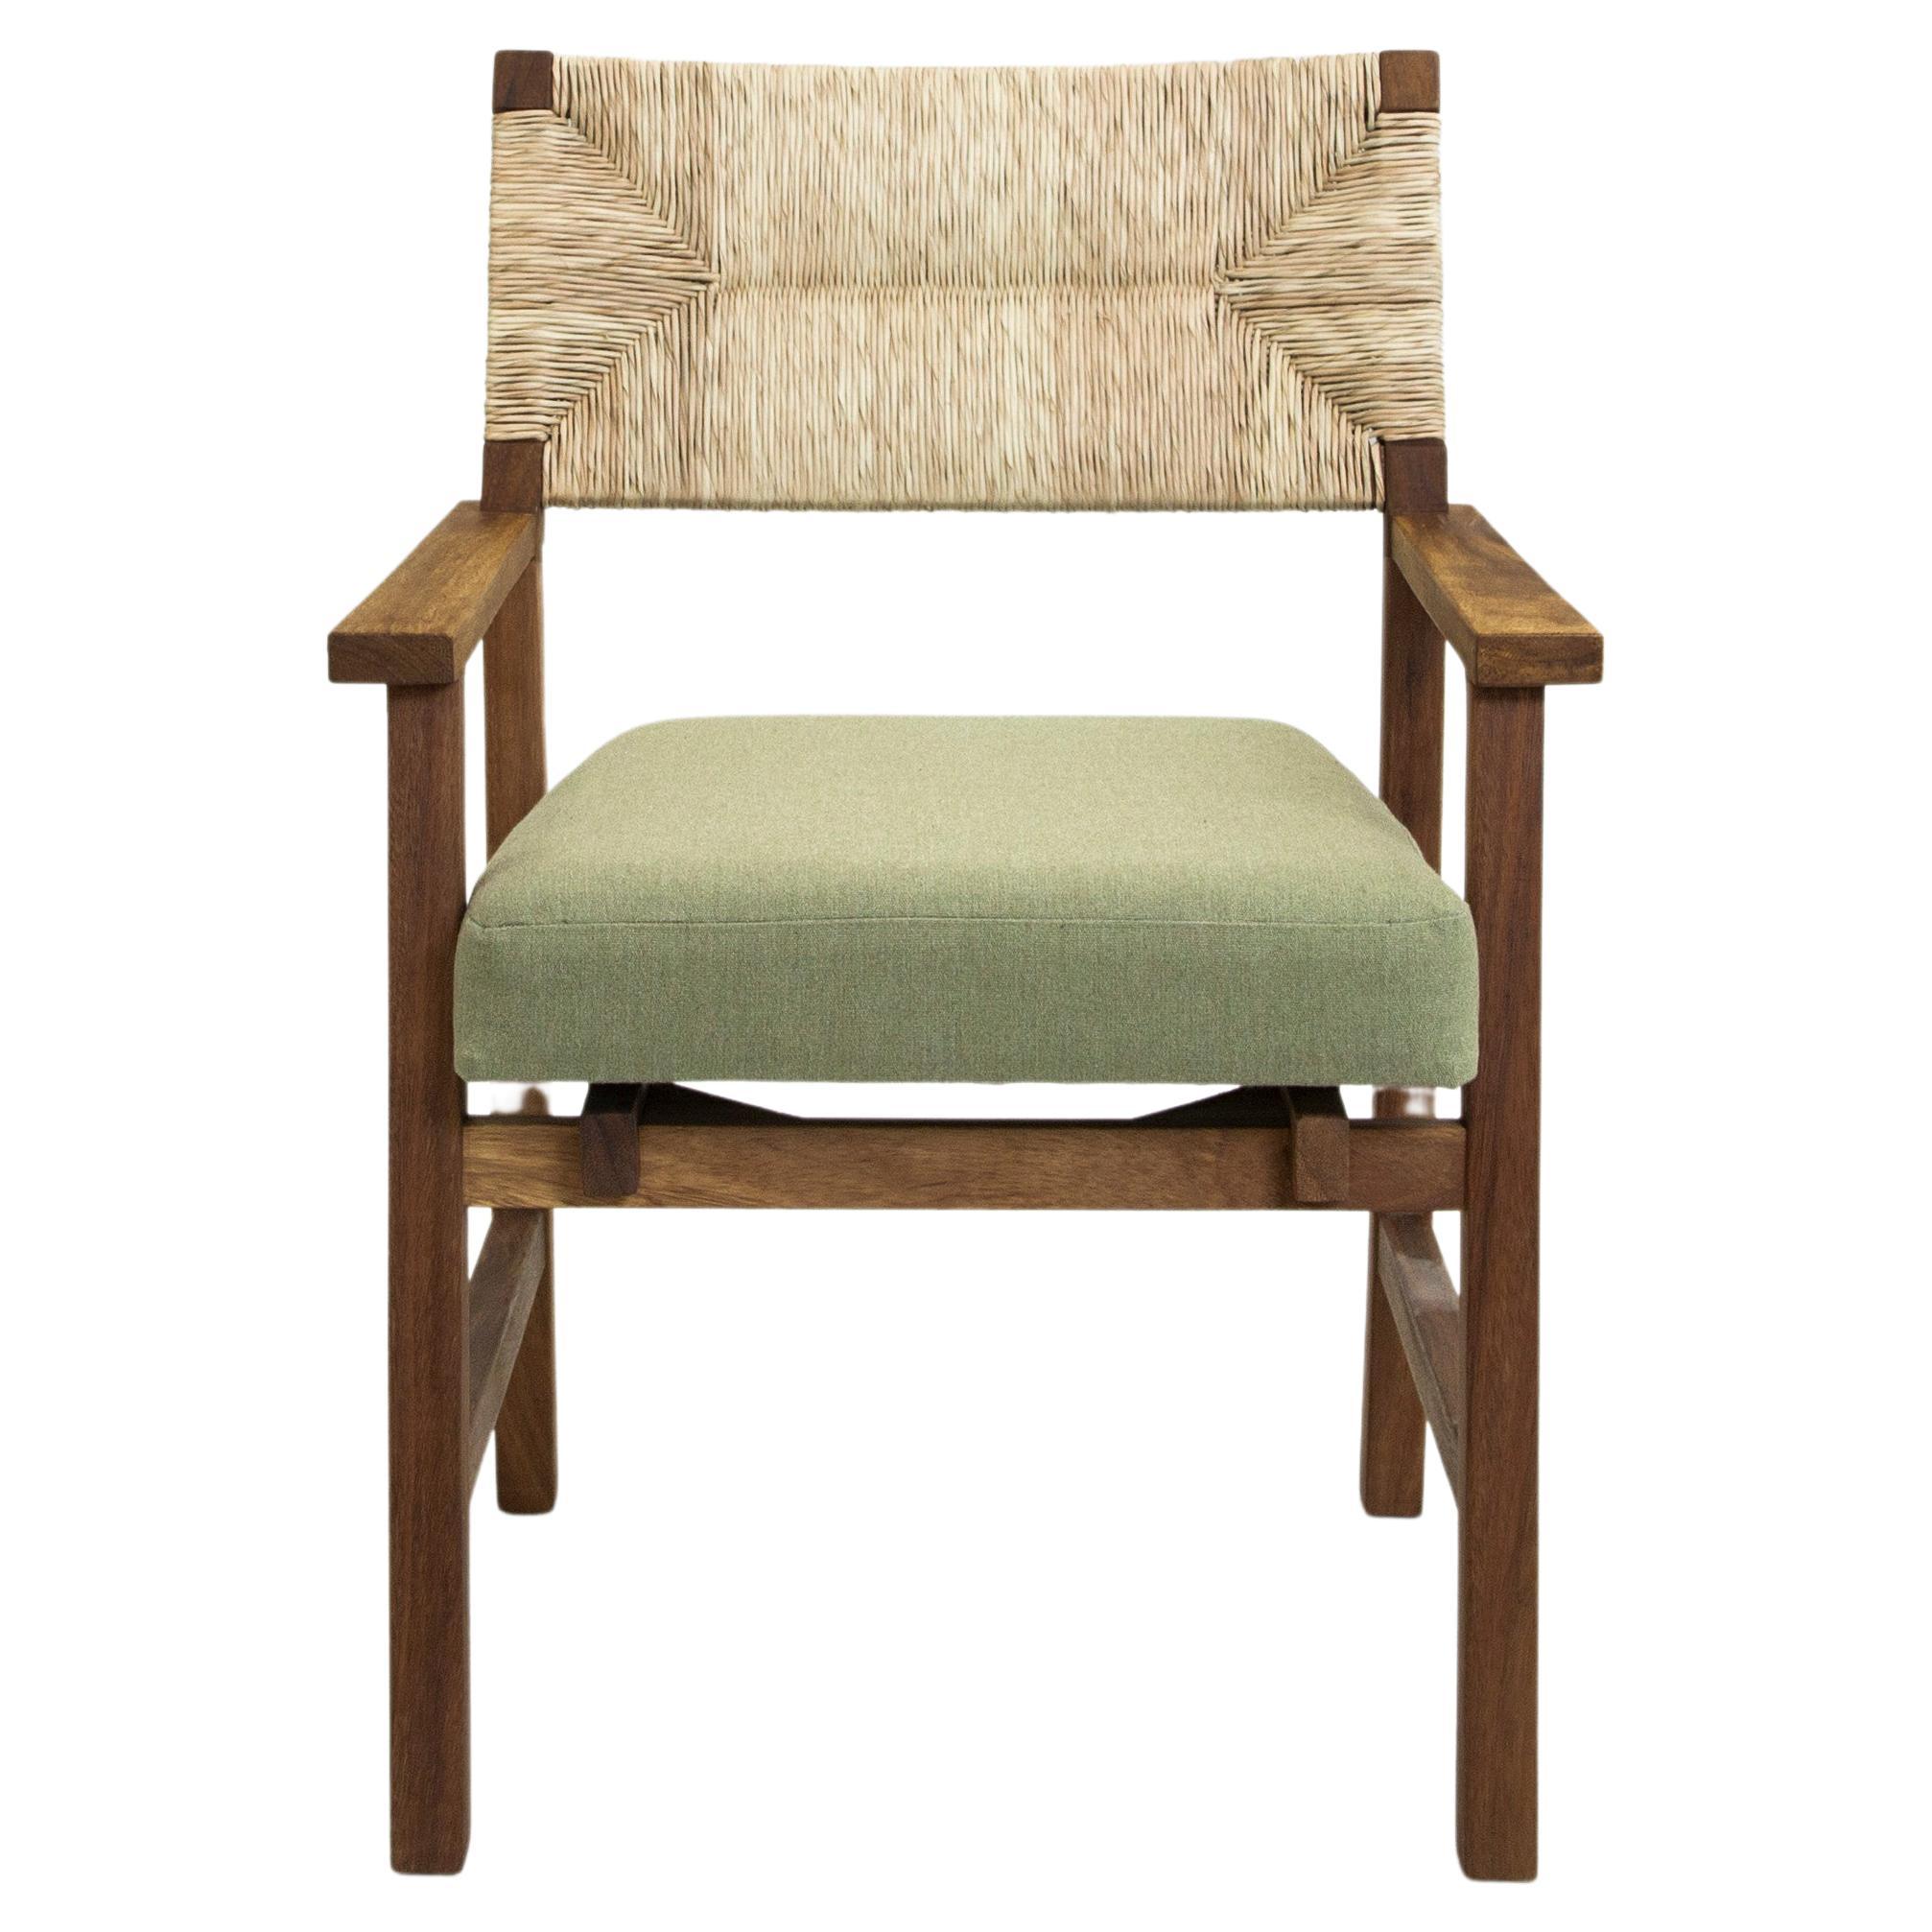 This classic design has a modern flourish without overshadowing the handcrafted details from the Natural Palm woven back that makes it so unique. The Lago dining chair is made of solid Huanacaxtle, a tropical hardwood from southern Mexico. The